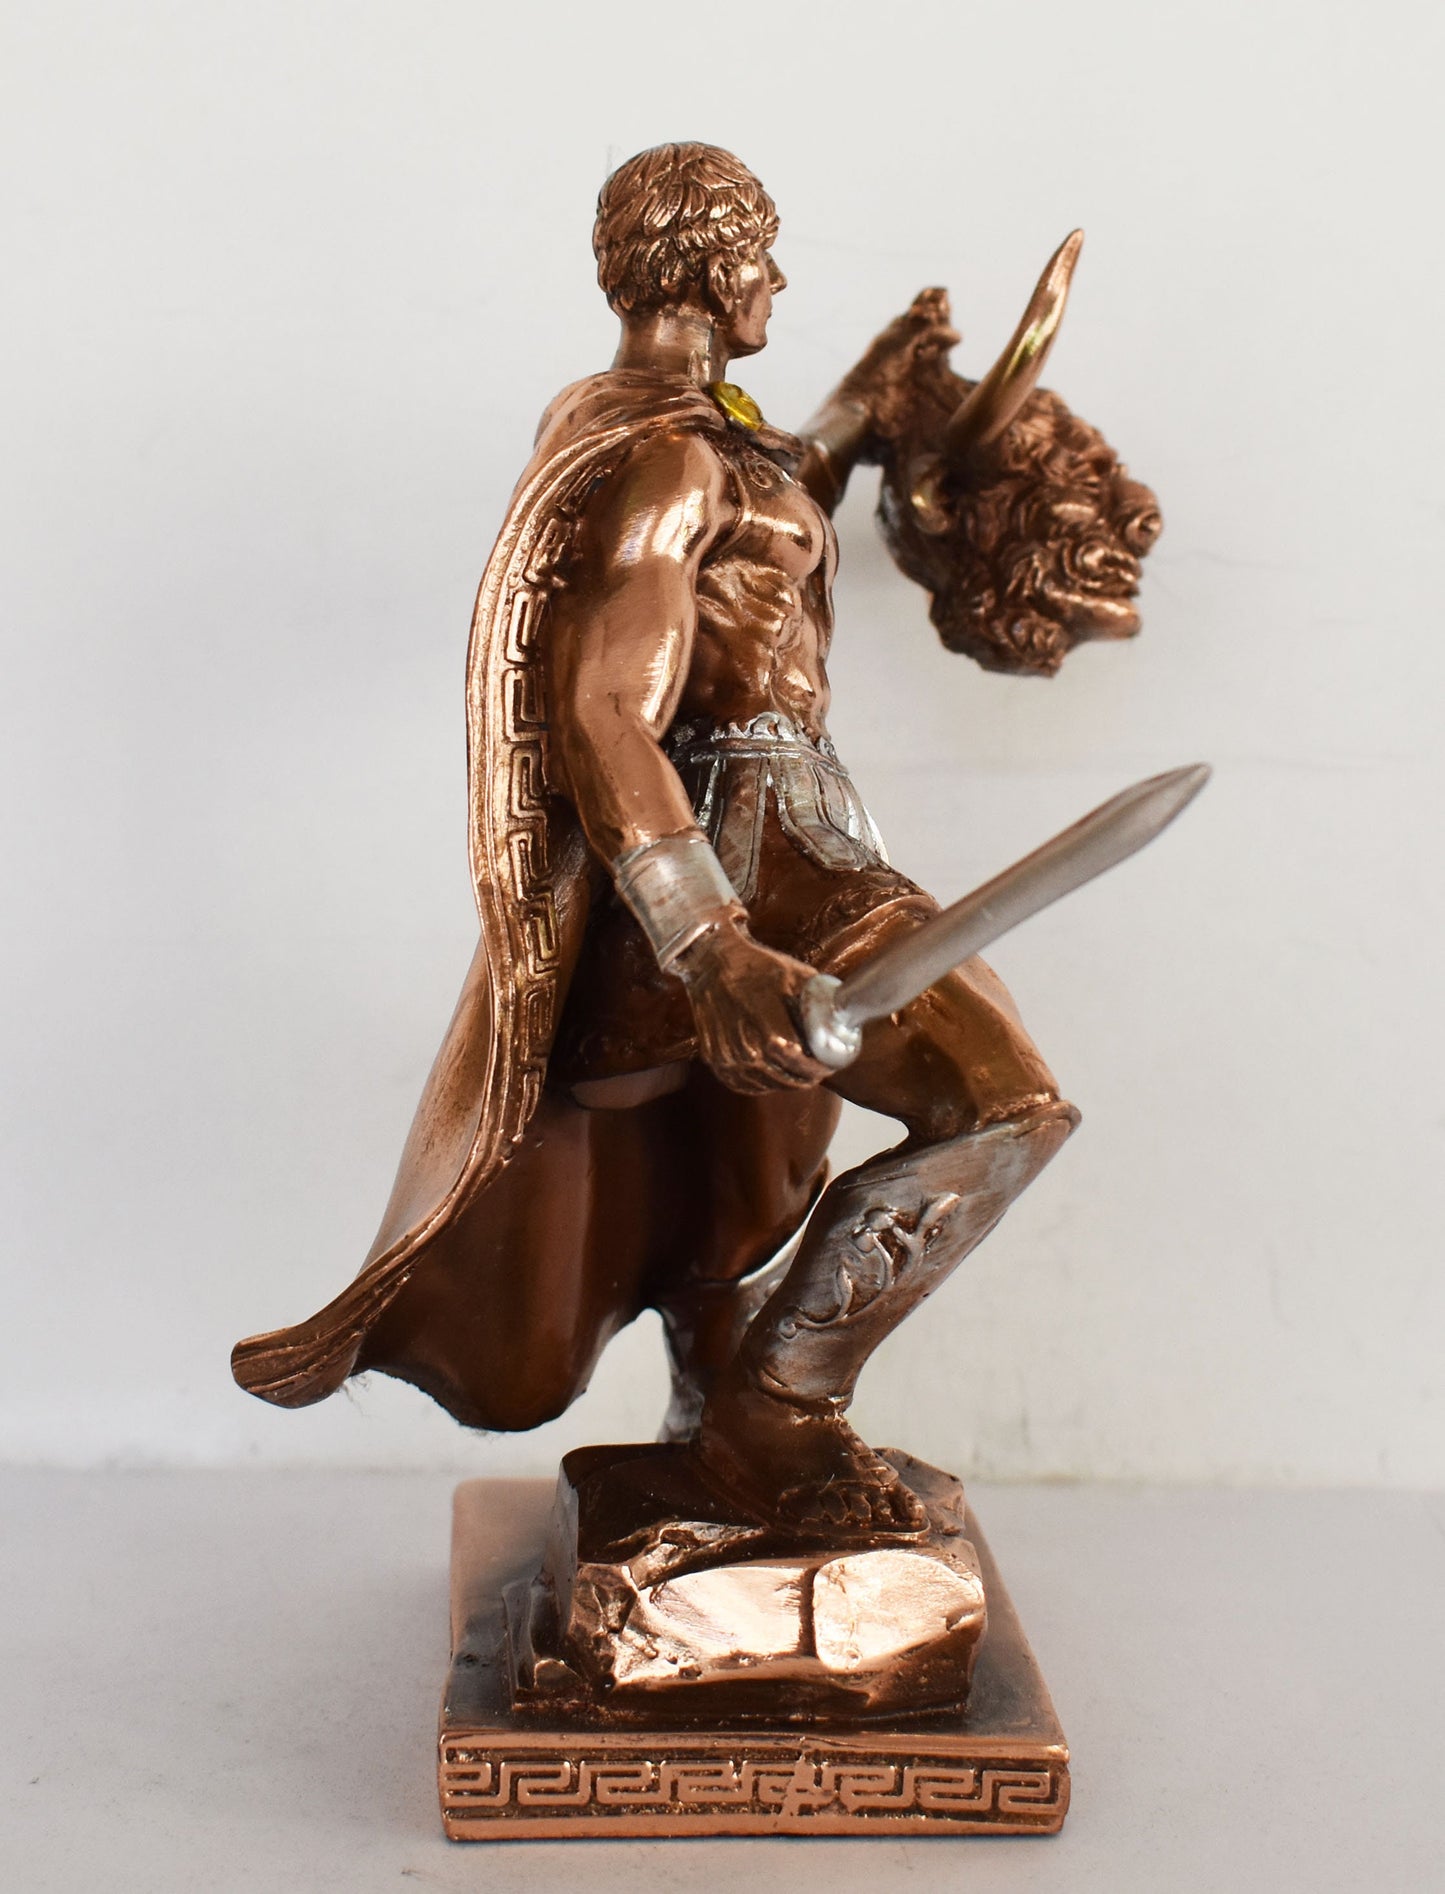 Theseus - Mythical King and Founder-Hero of Athens - Slaying of the Minotaur - Half Man and Half Bull - Copper Plated Alabaster